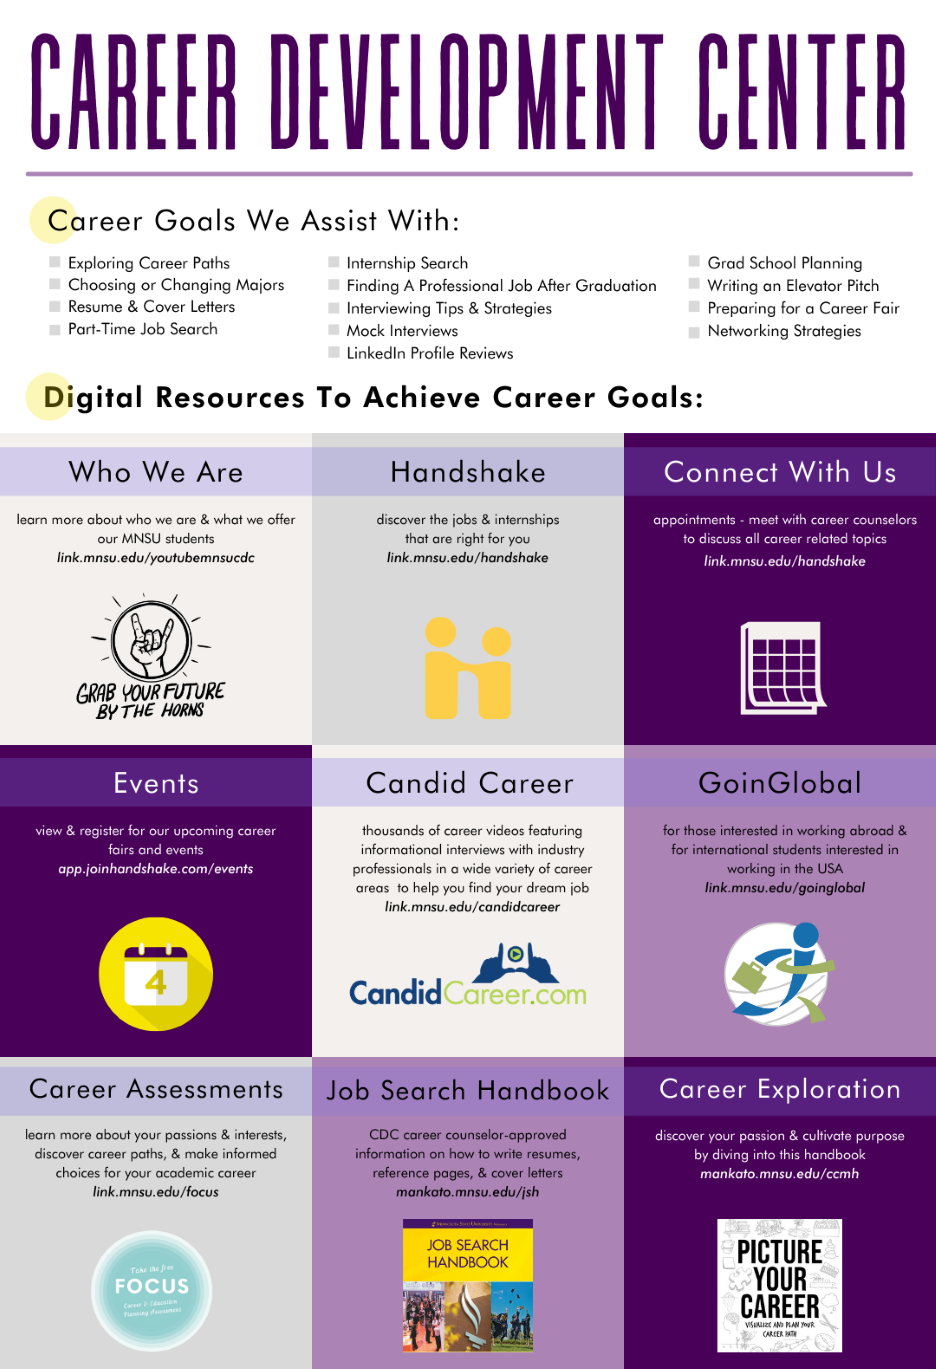 Career Development Center 2021 services and resources poster